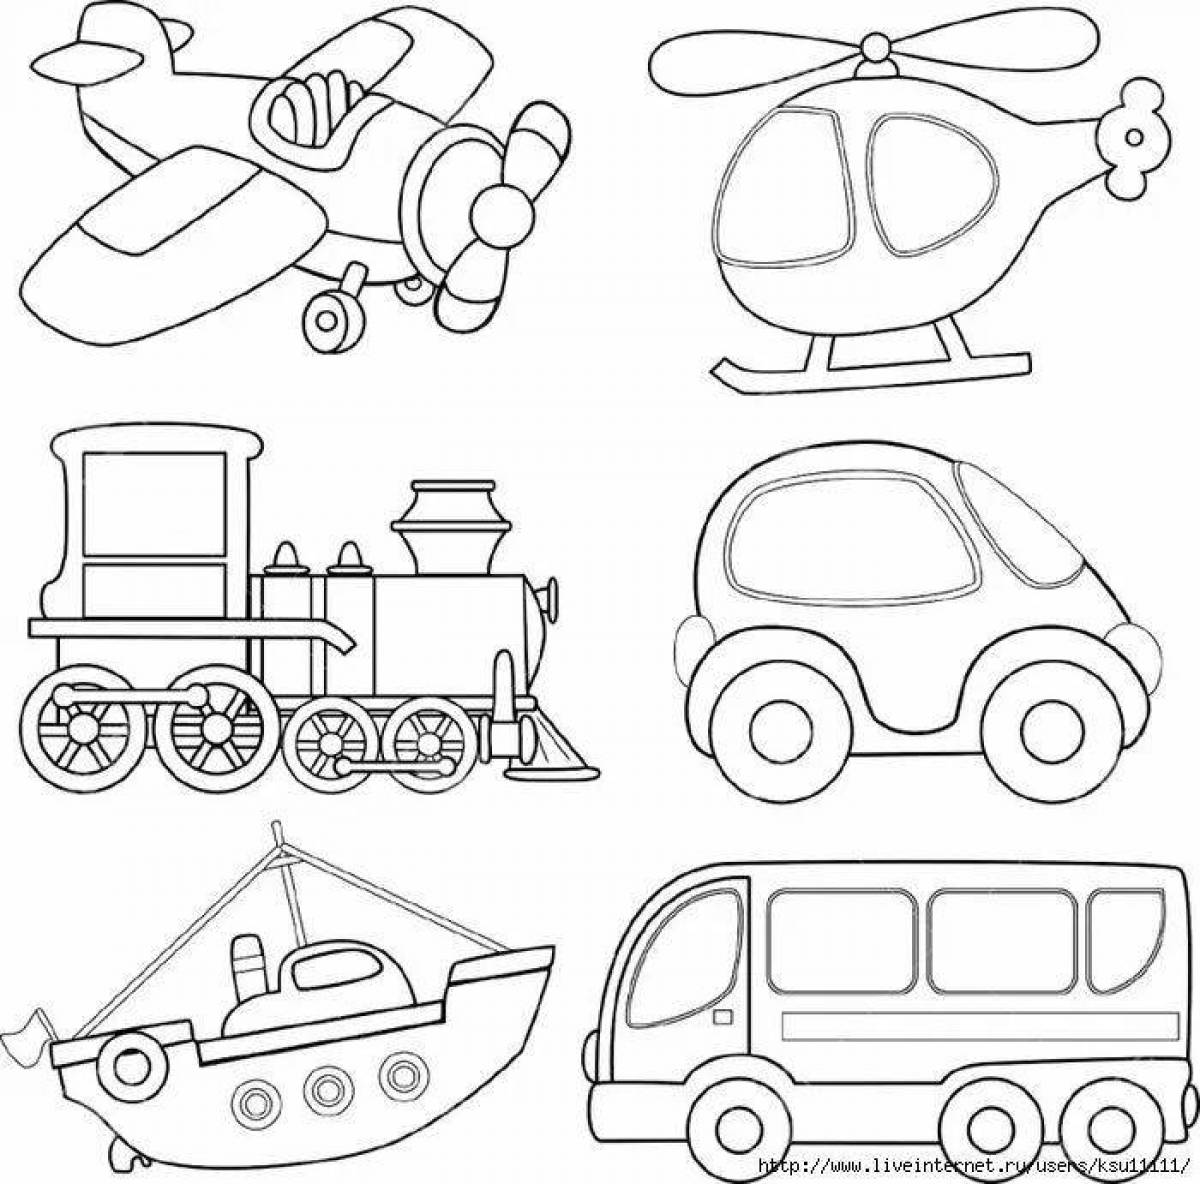 Fabulous ground transportation coloring page